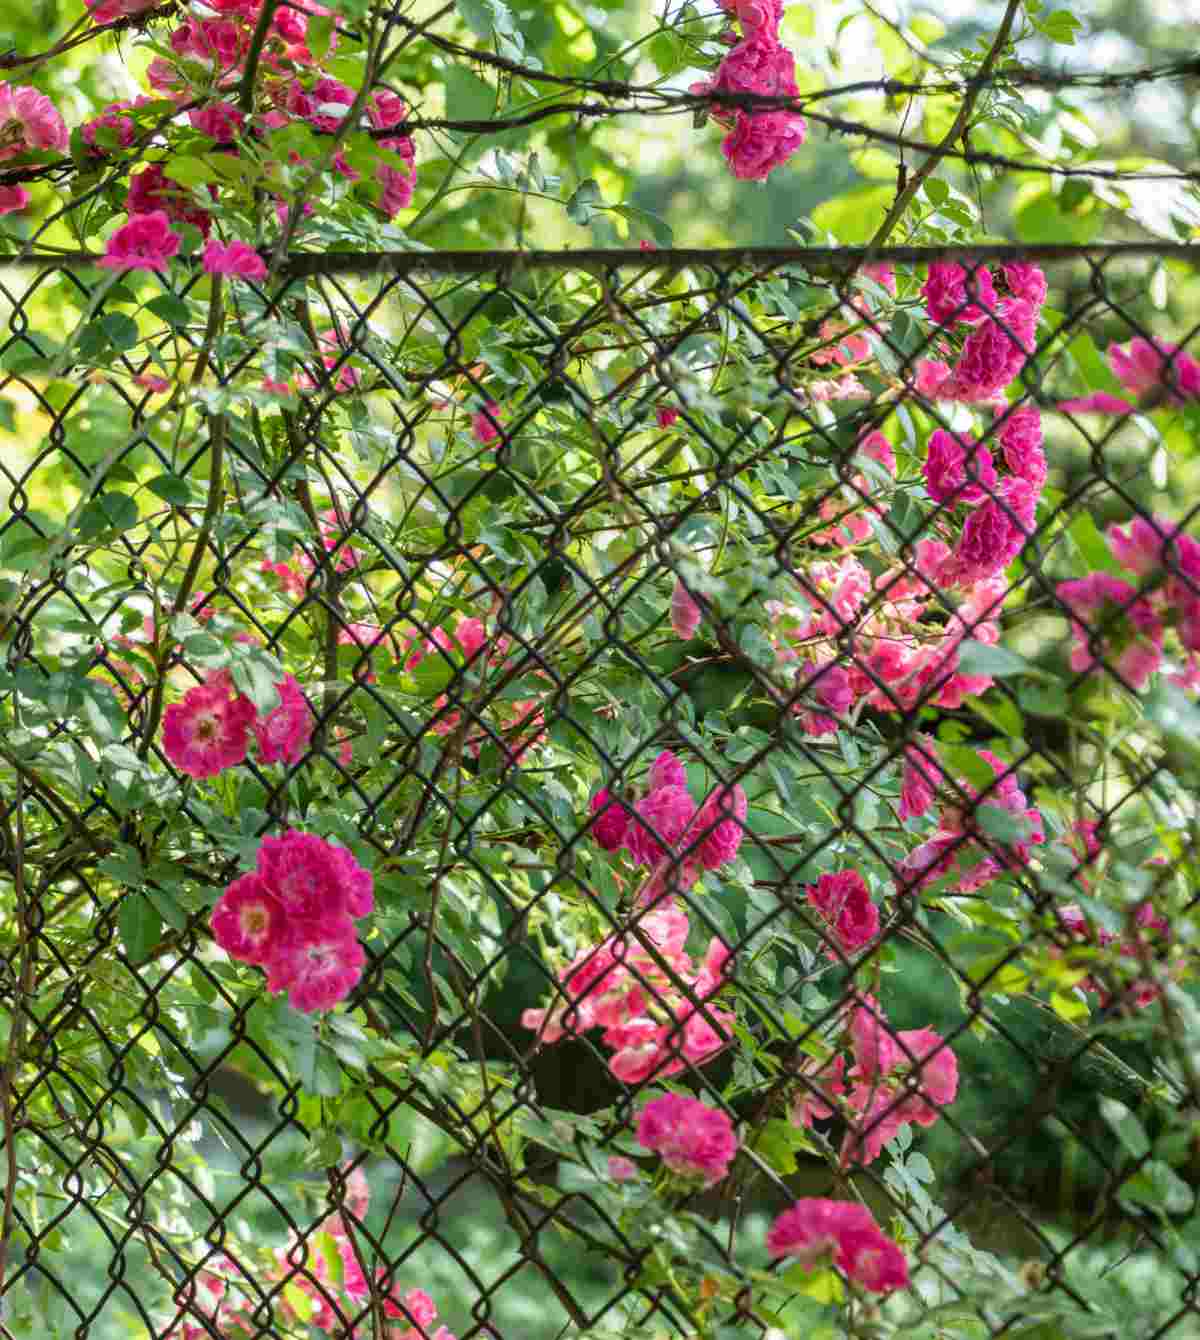 Chain Link Fence with Climbing Plants